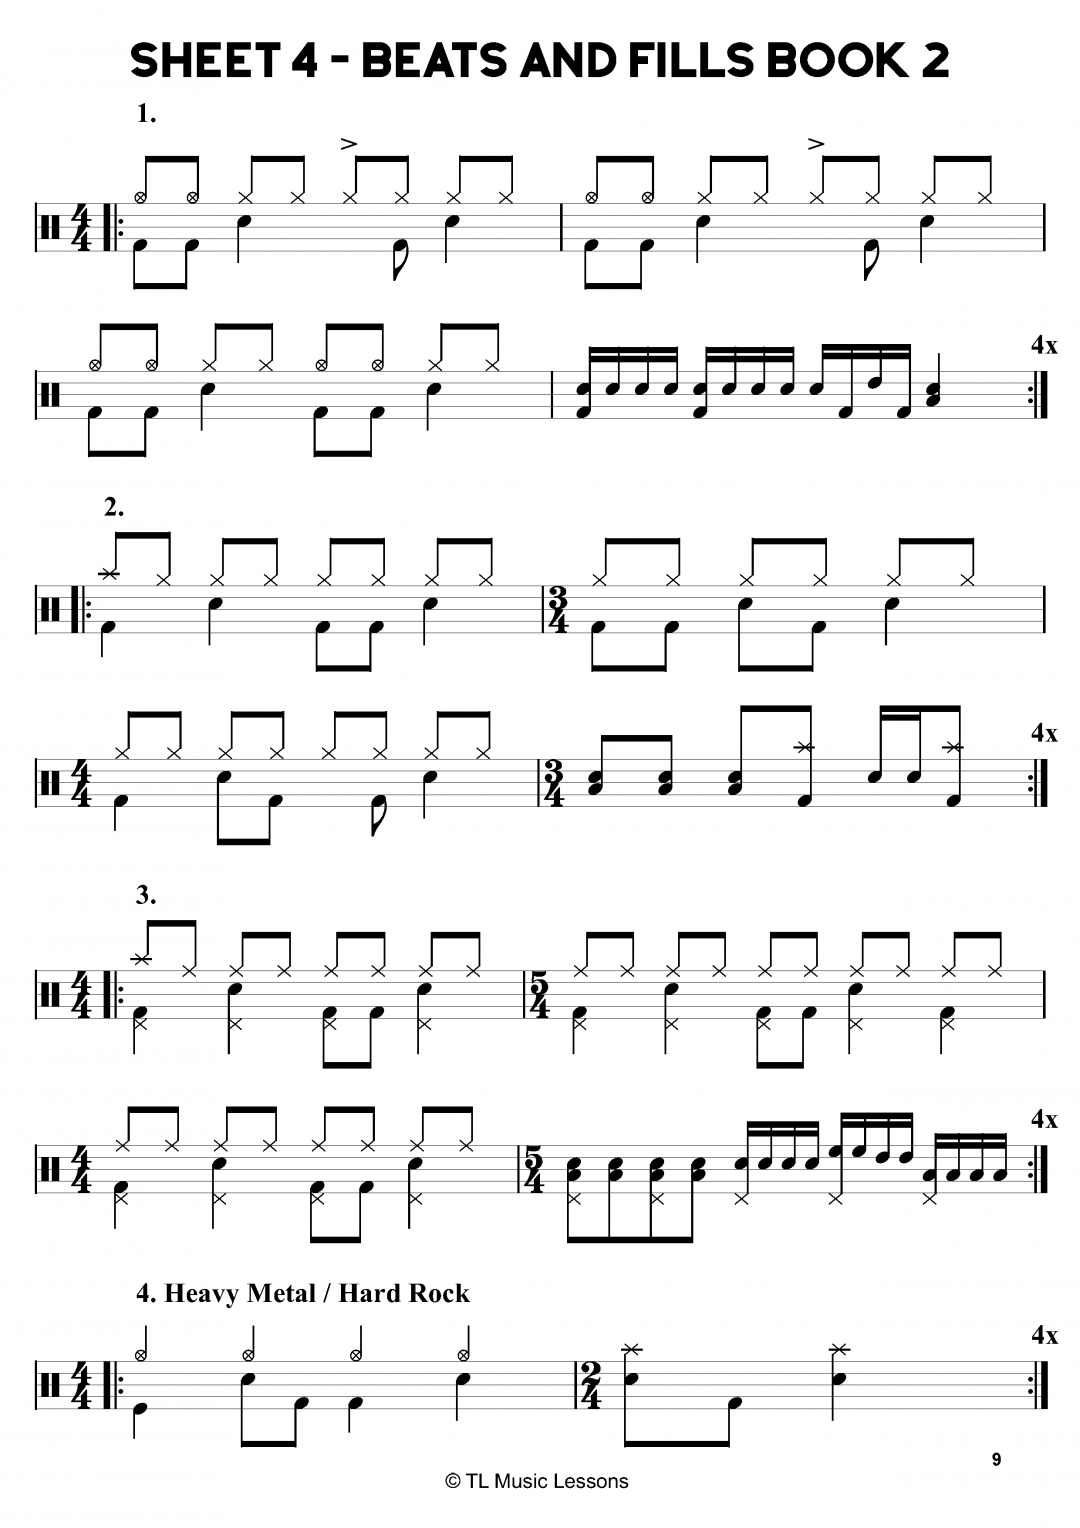 Drum beats and drum fills in different time signatures – Sheet 4 – 40 Beats and Fills Book 2